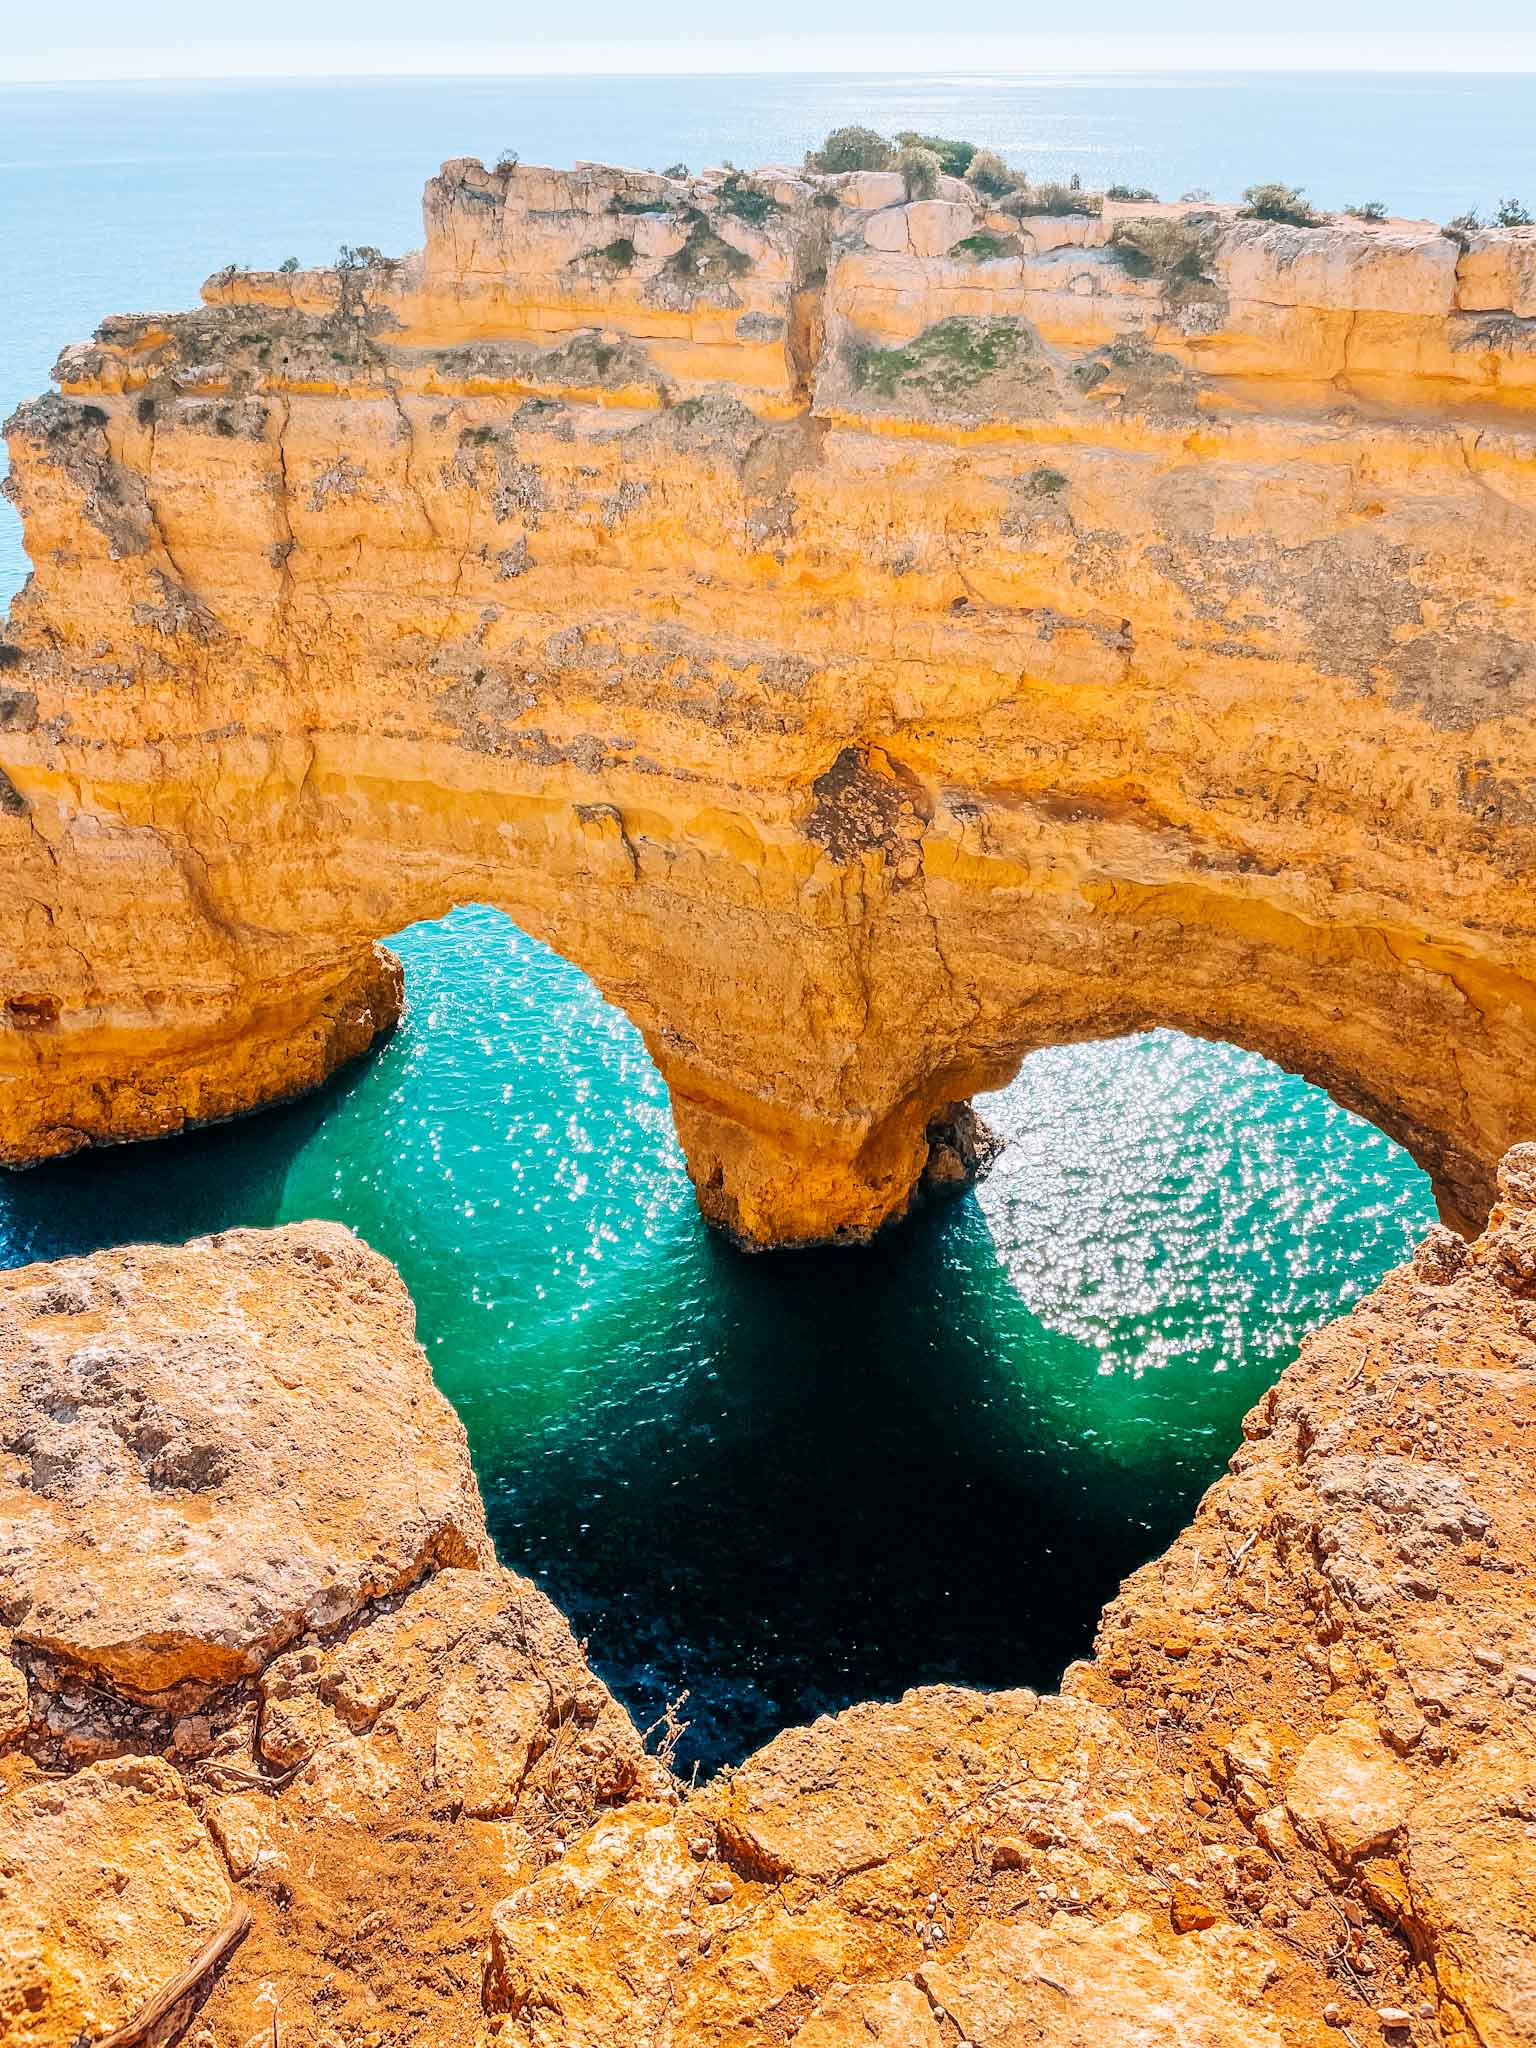 How to find the heart-shaped rock in Algarve